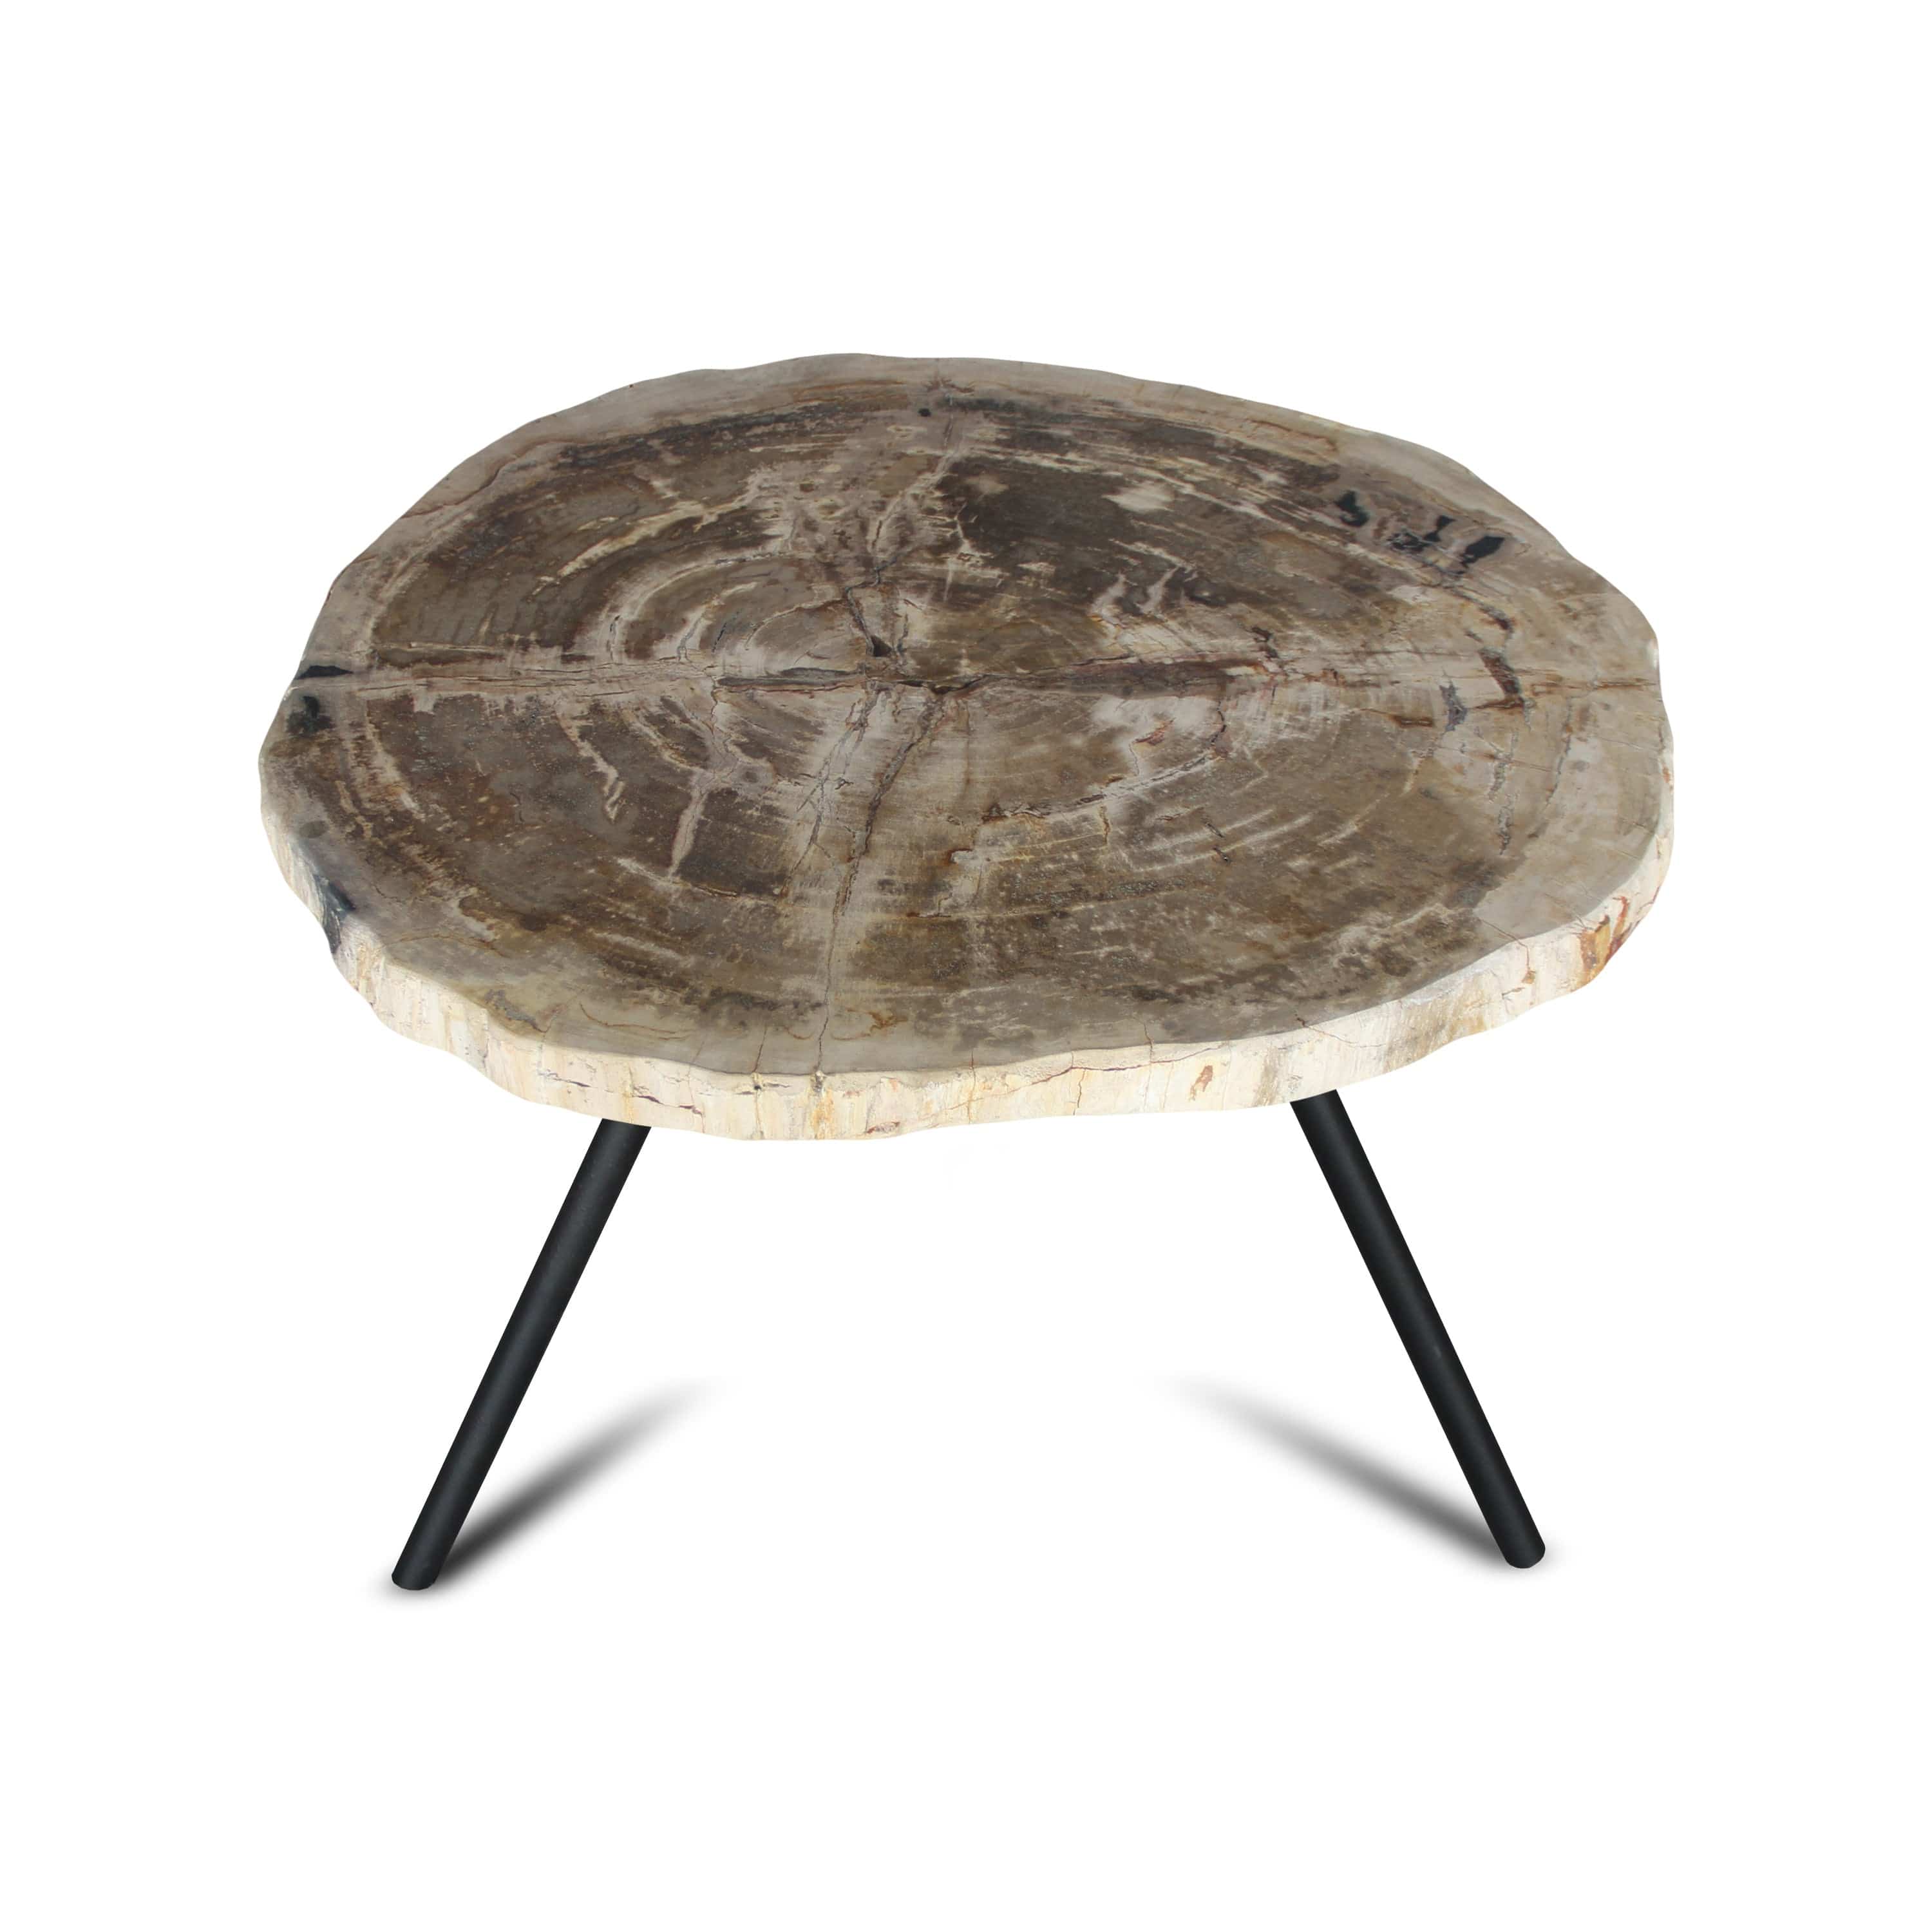 Kalifano Petrified Wood Petrified Wood Round Slice Side Table from Indonesia - 26" / 66 lbs PWT2400.004